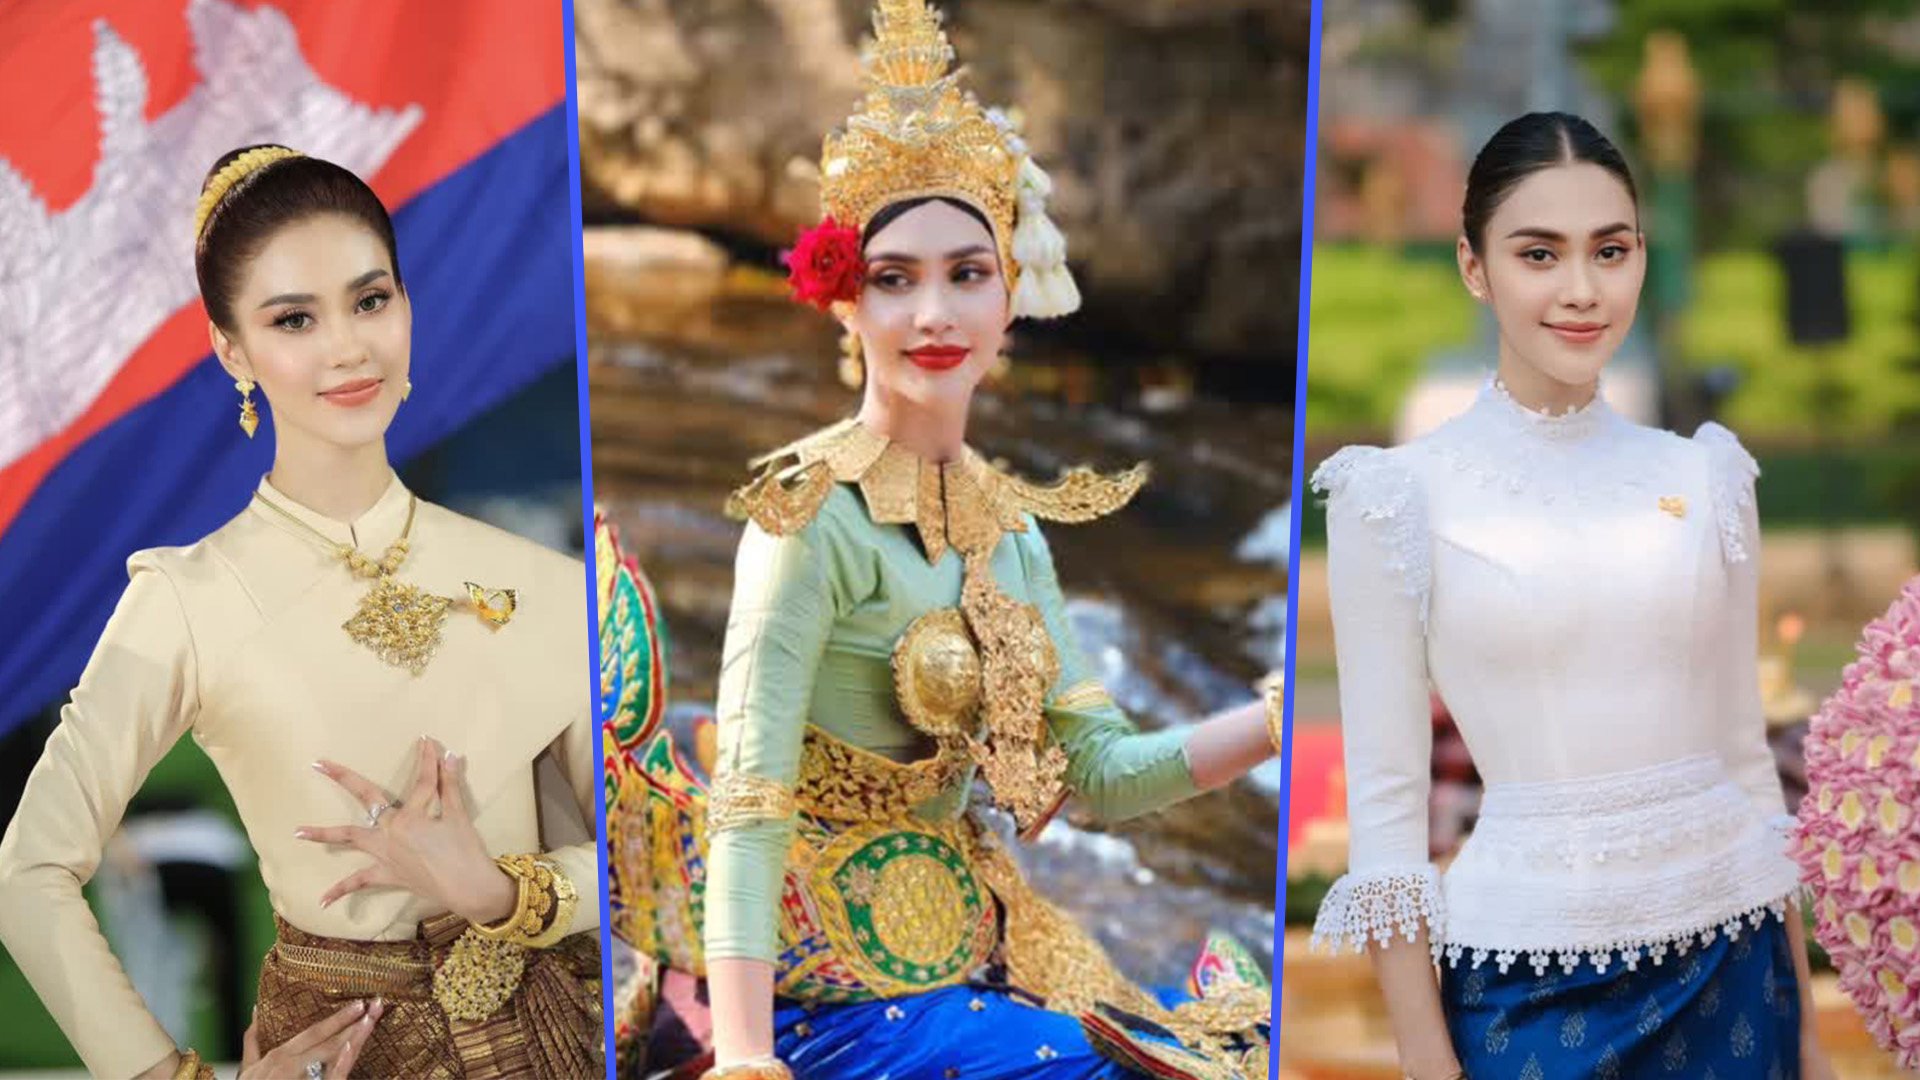 A Cambodian dancer, who many believe could be a success in the world of modelling or movies, has achieved international acclaim for sticking to promoting the country’s culture across the globe. Photo: SCMP composite/tnaot.com